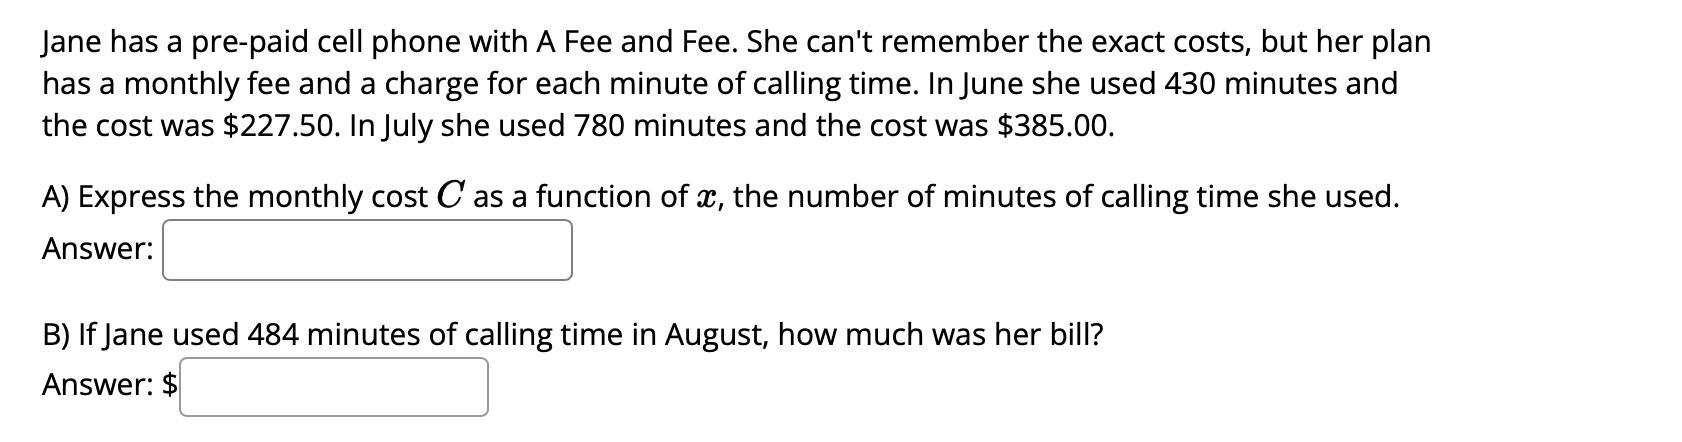 Jane Has A Pre-paid Cell Phone With A Fee And Fee. She Can't Remember The Exact Costs, But Her Plan Has